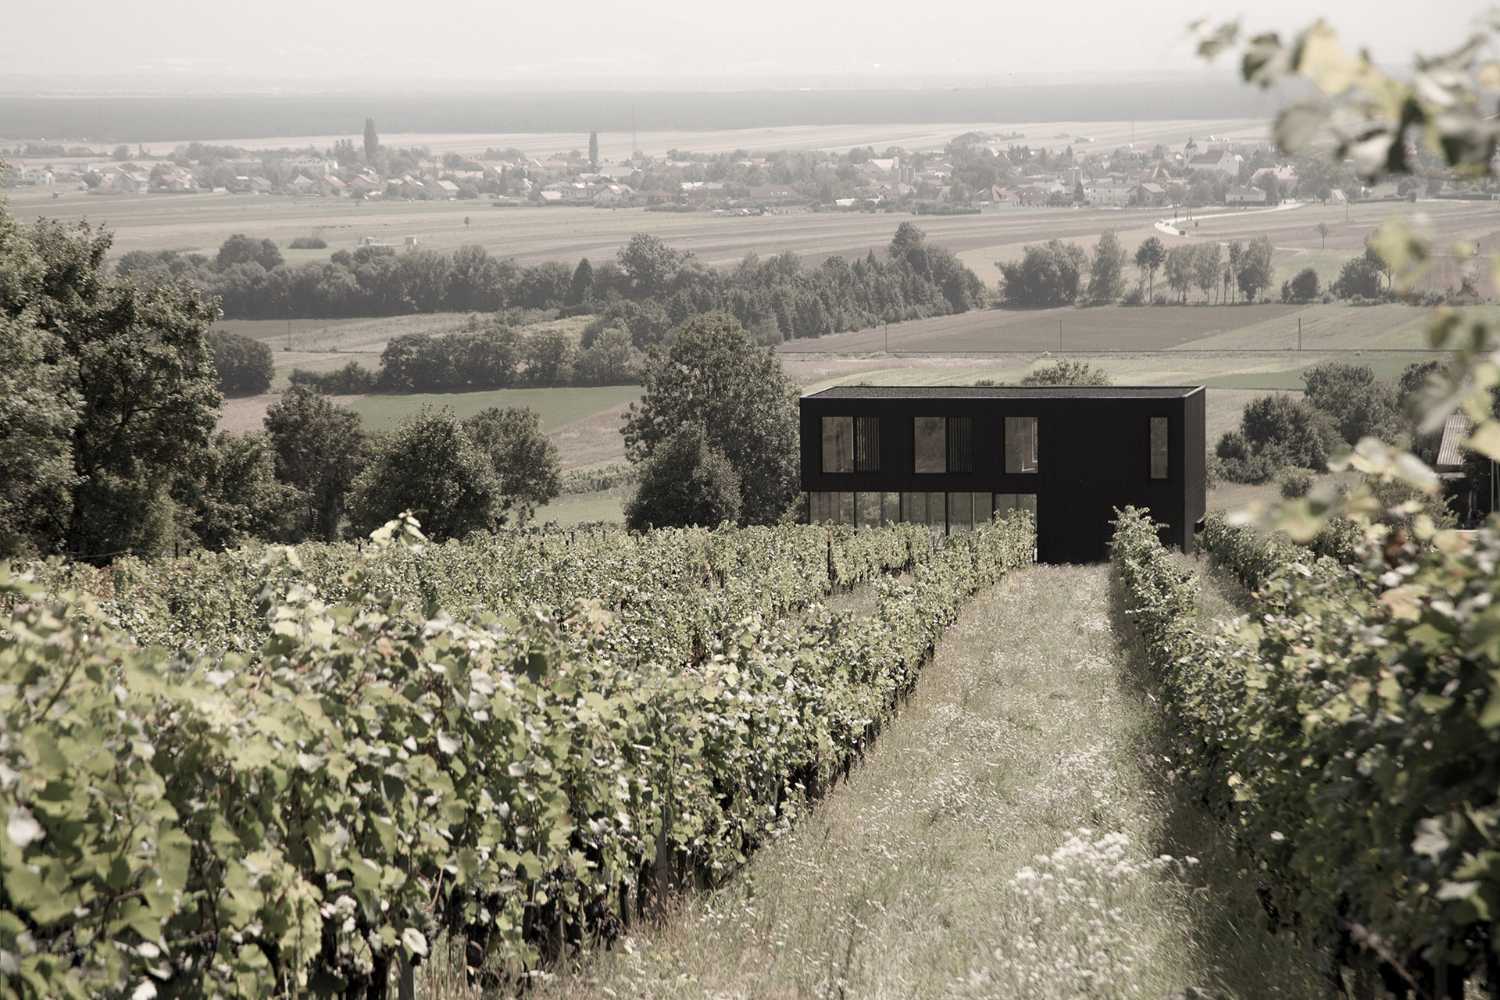 House on wine terraces. Wooden slats cover the structure like a velvety black veil